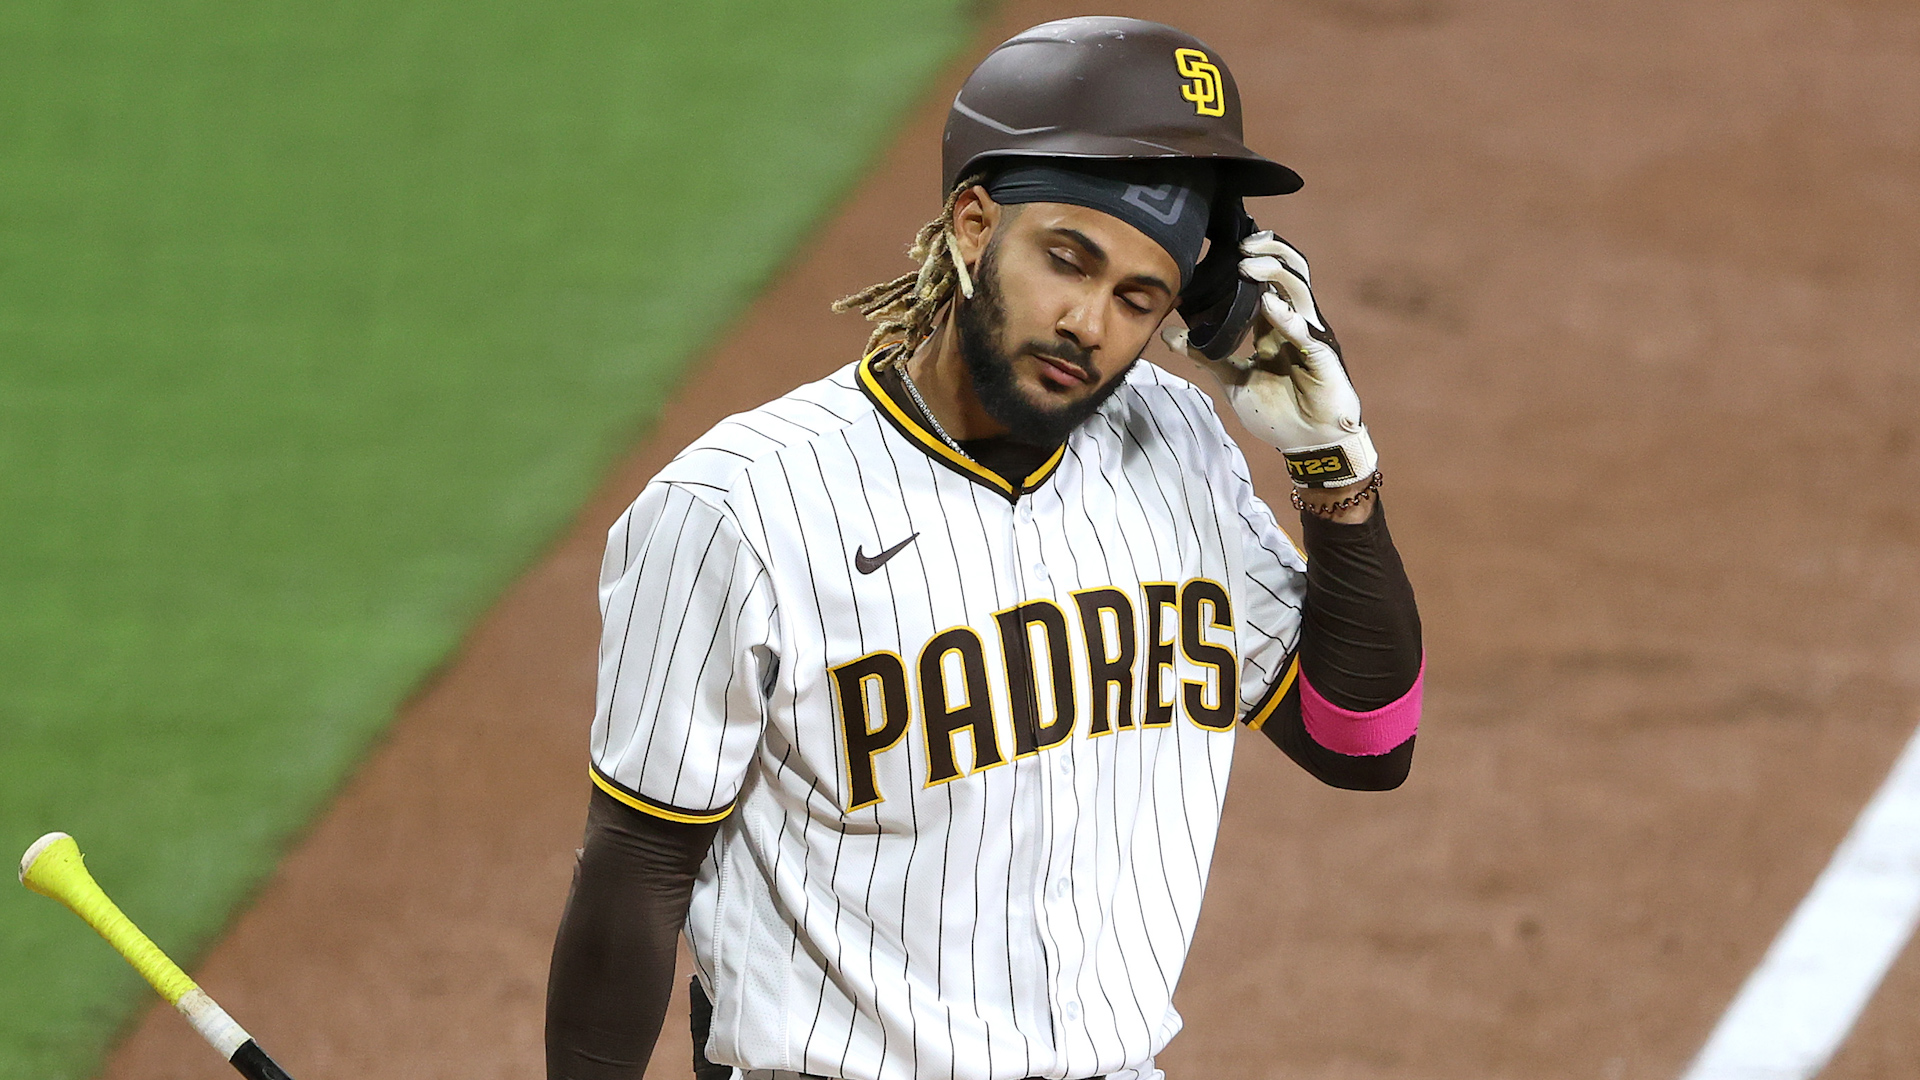 Padres' Fernando Tatis Jr. Placed on IL After Positive COVID-19